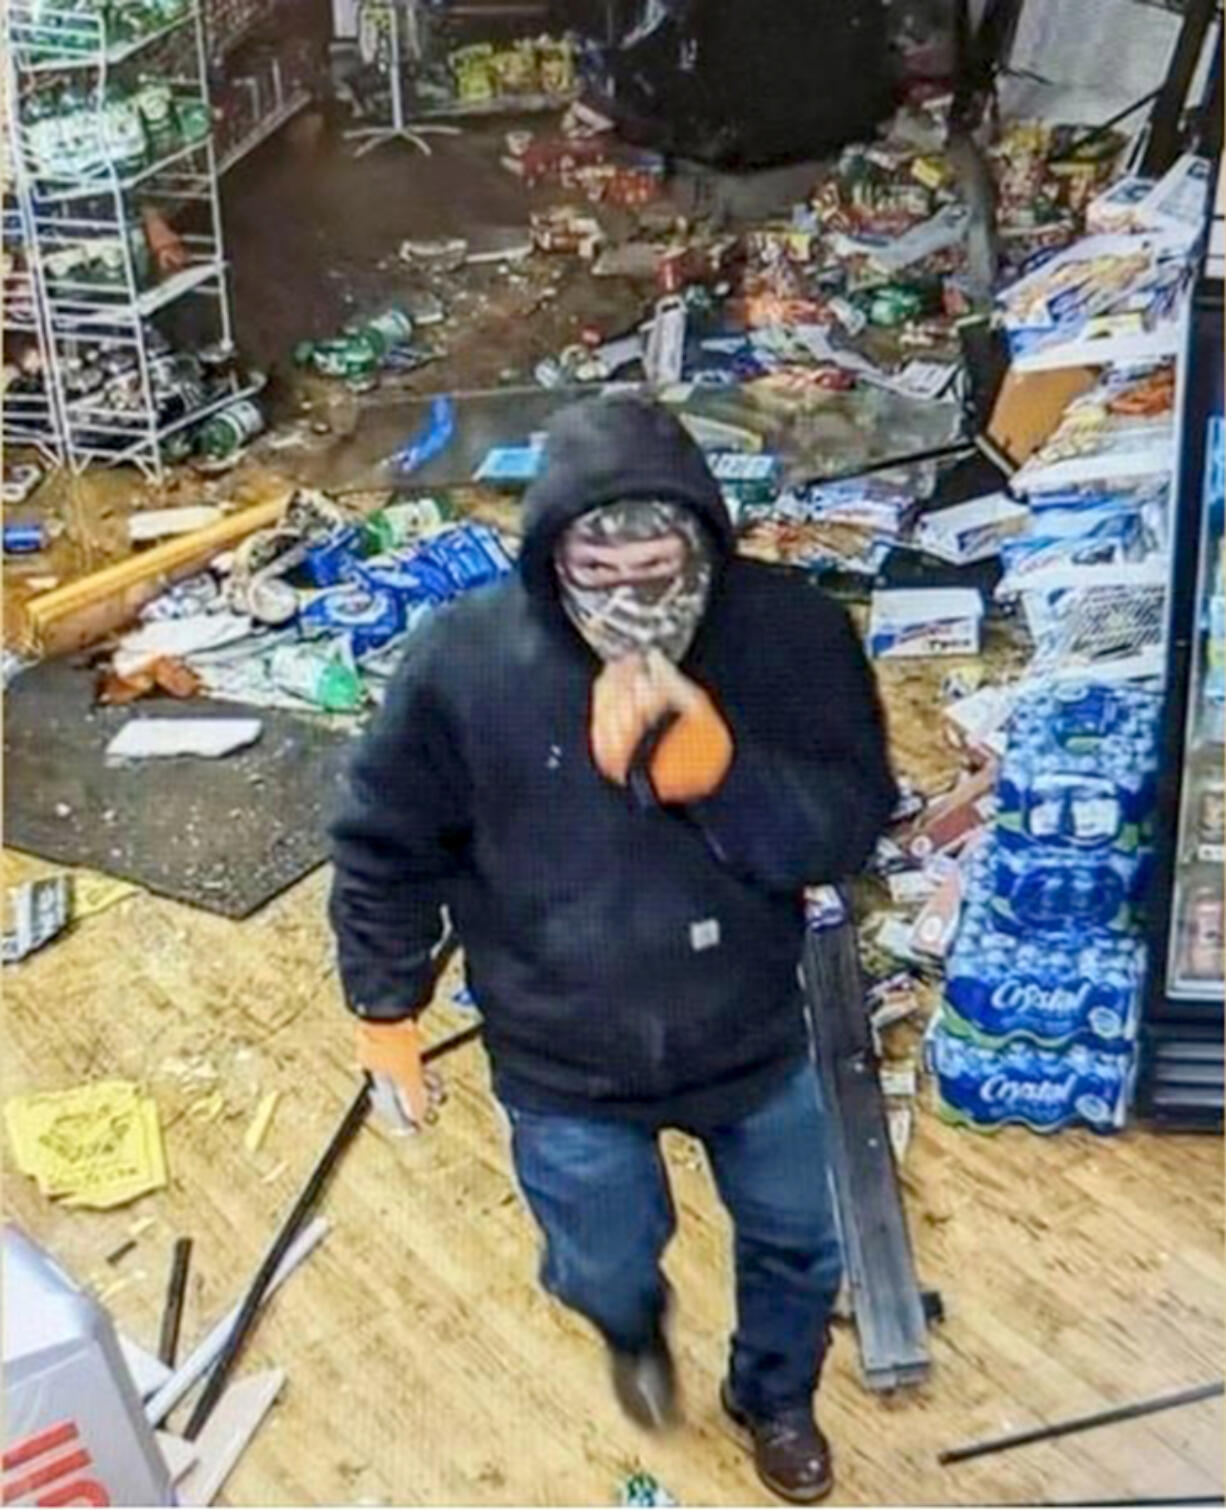 The Clark County Sheriff's Office is asking for help identifying this man who was caught on video driving a stolen truck through the window of the Lewisville store.